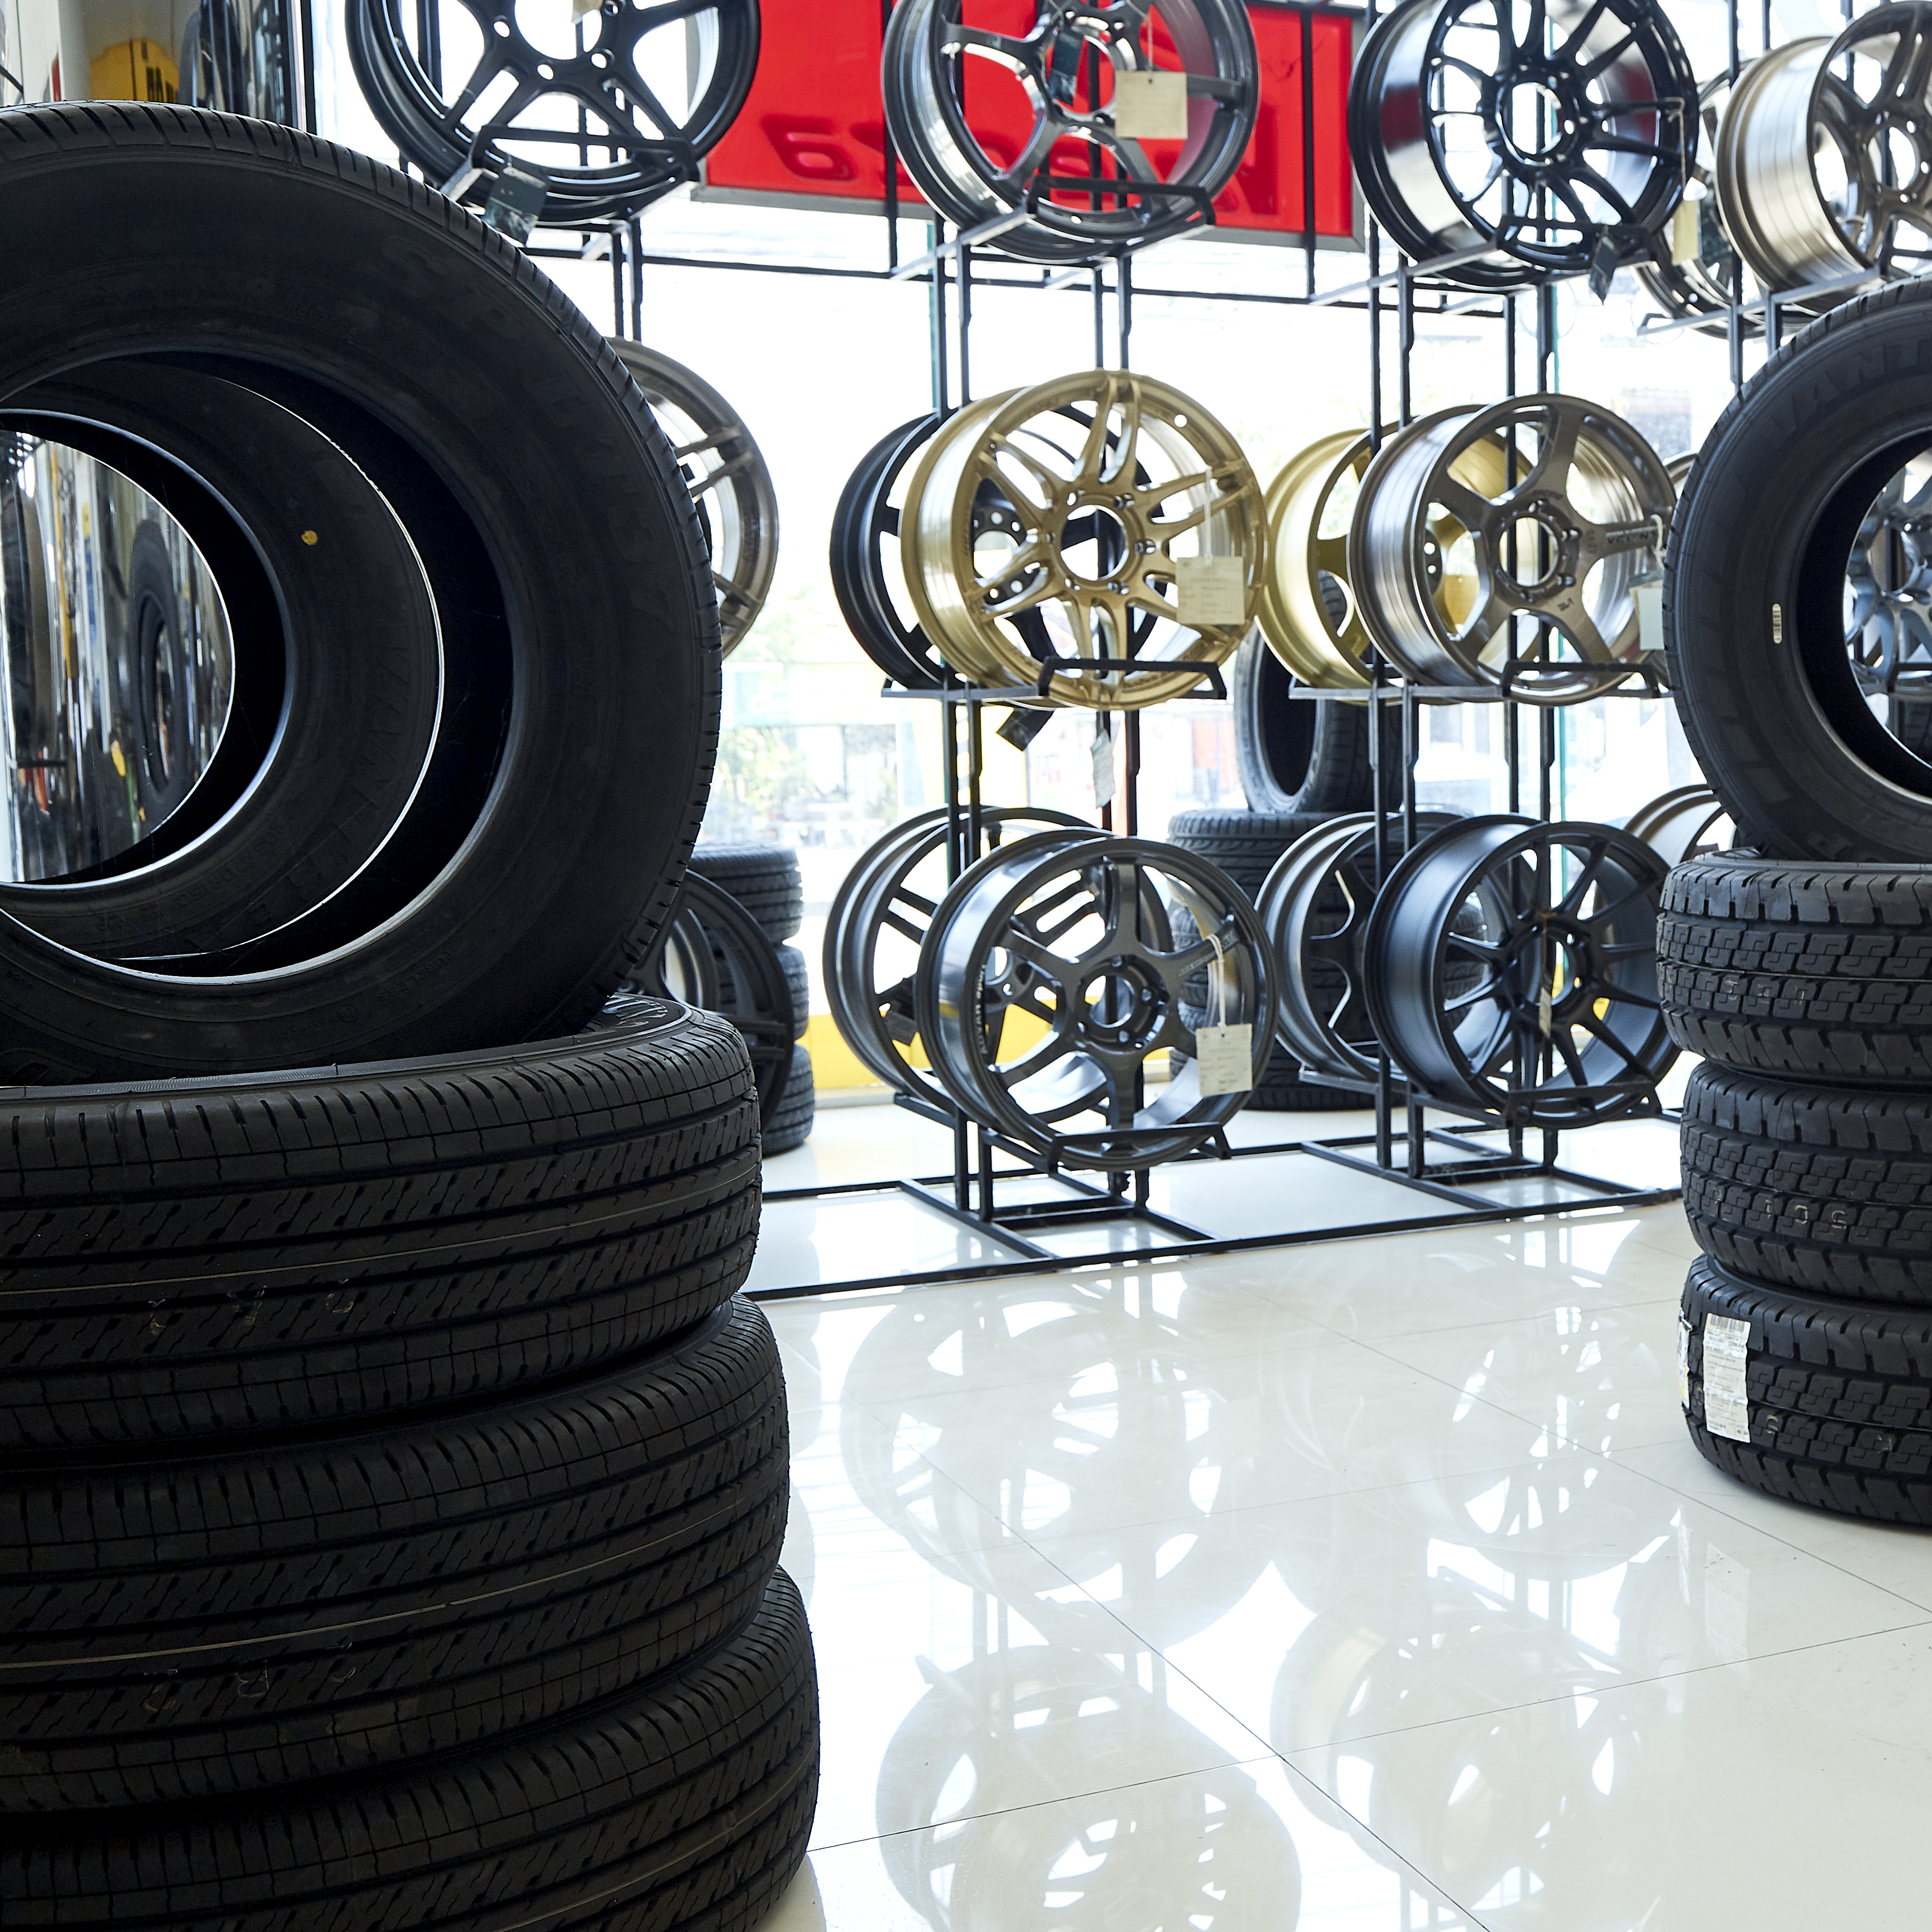 Tires For Sale At A Tire Store